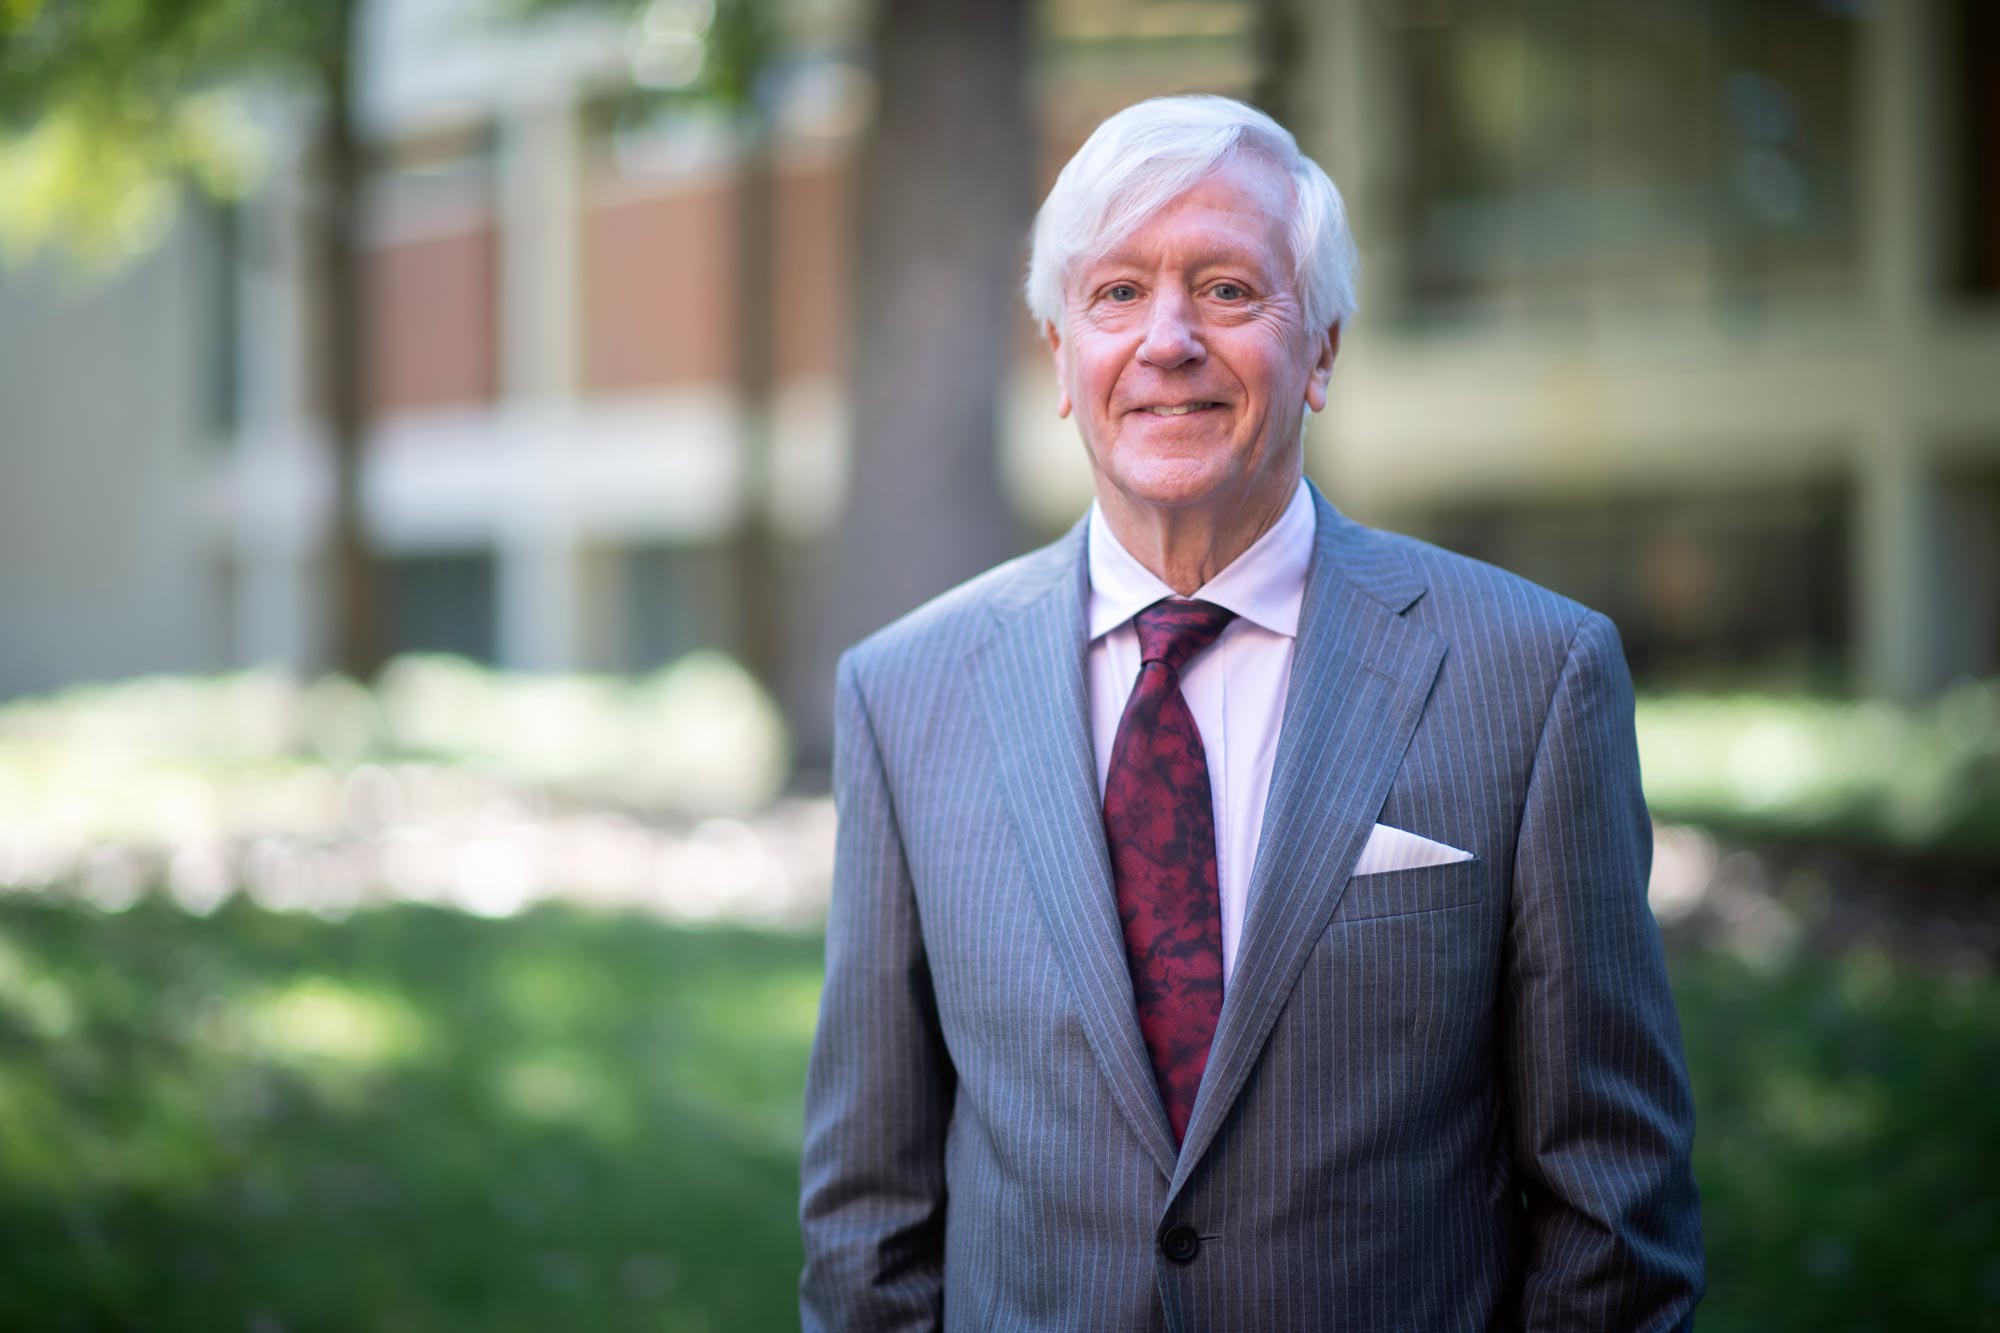 University of Virginia School of Law professor G. Edward White wearing a gray suit and maroon tie